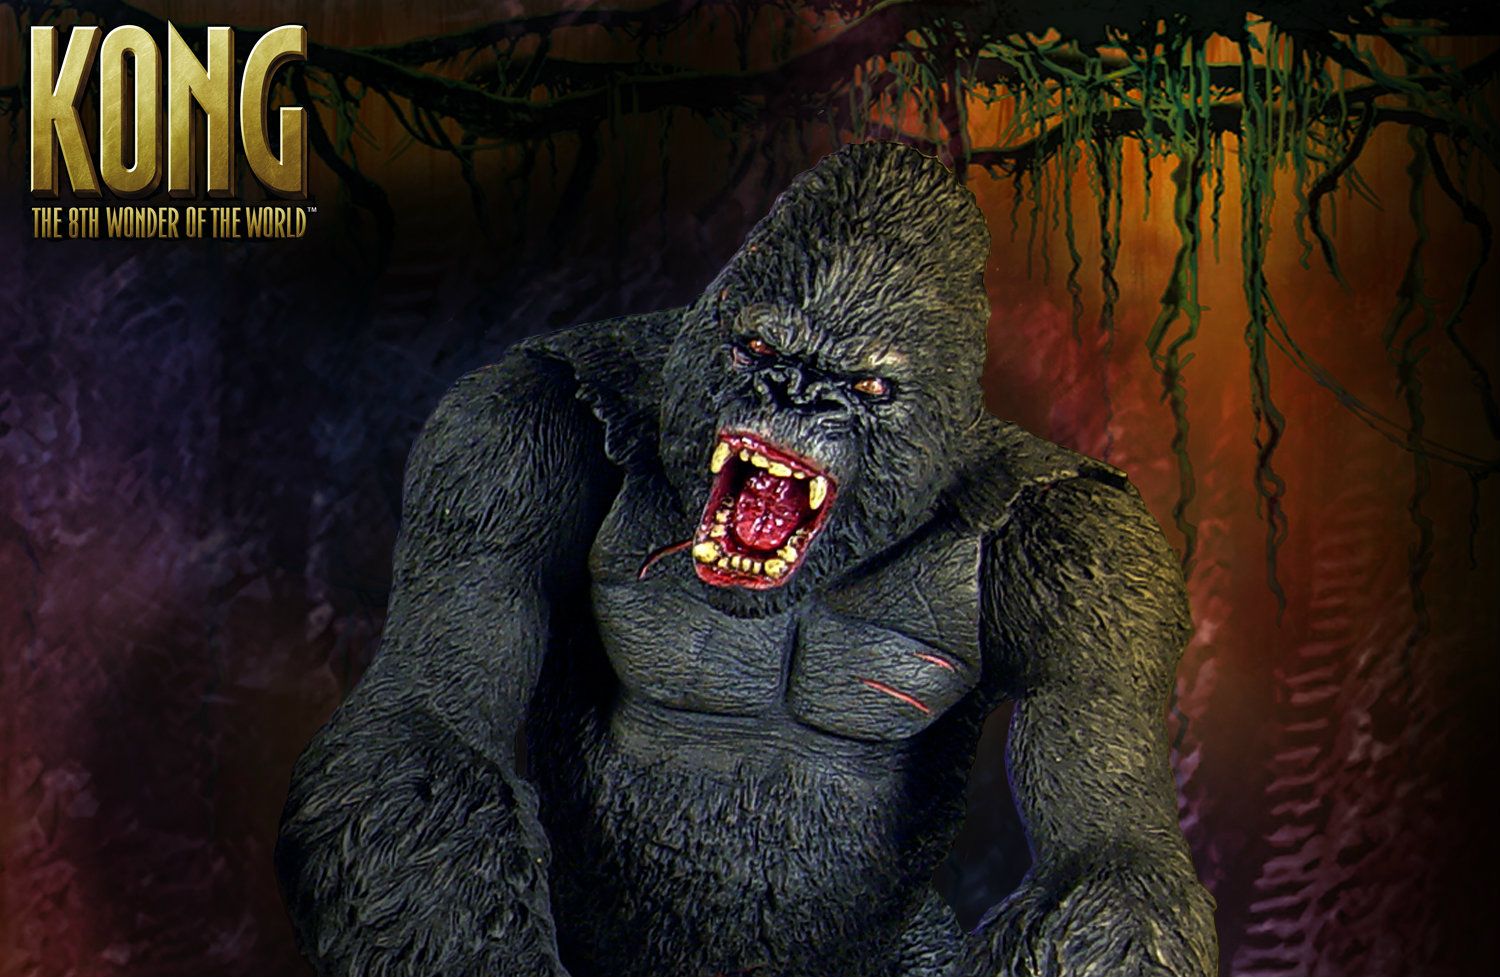 Throwback Thursday: When Kong Was King